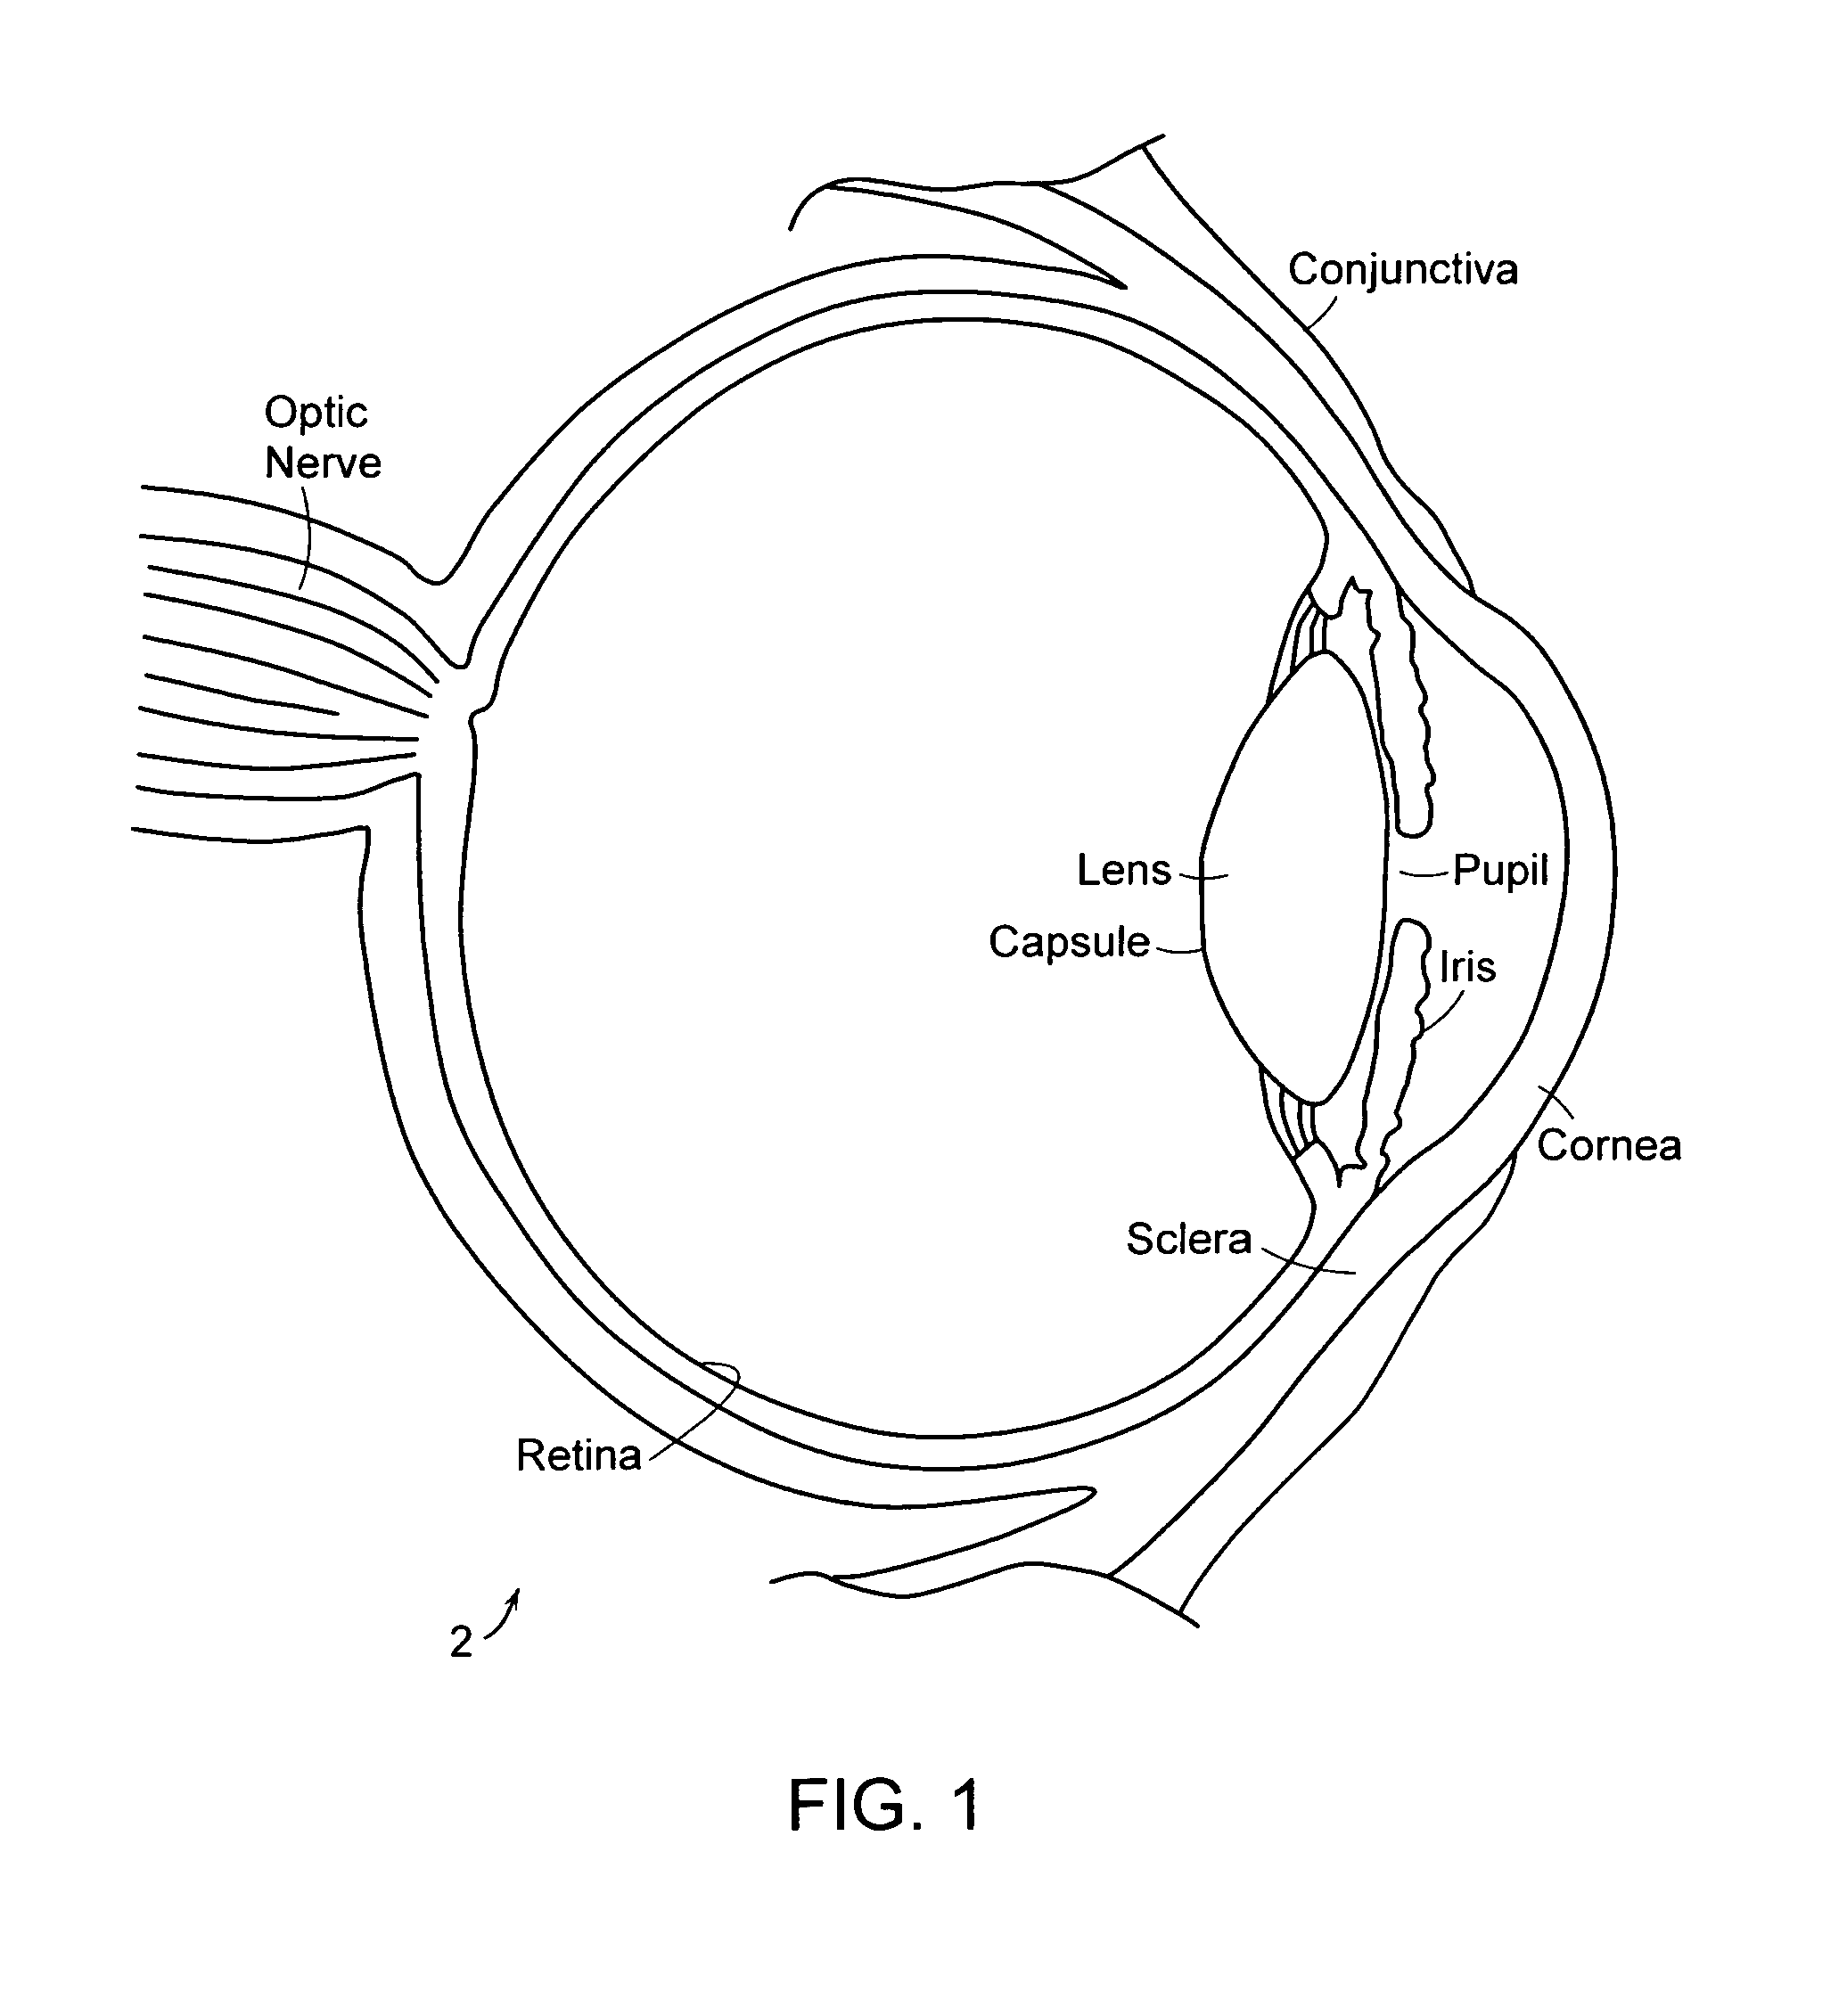 Injectable bag intraocular lens system, inserting device for use therewith, method for inserting an injectable bag intraocular lens within a human eye, methods for treating aphakia and system kits